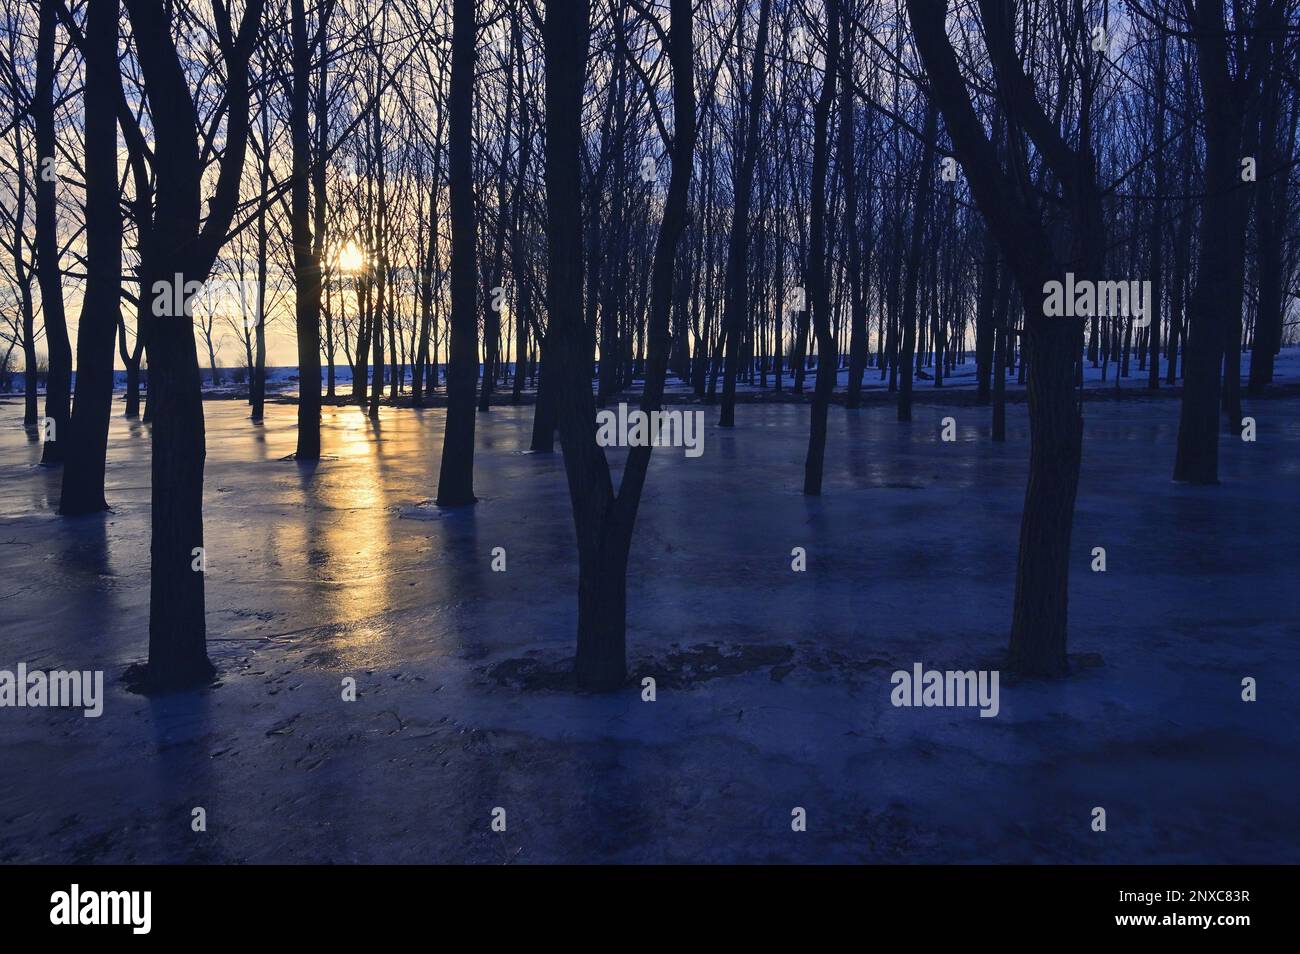 Frozen flooded Forest in Winter Sunrise Stock Photo